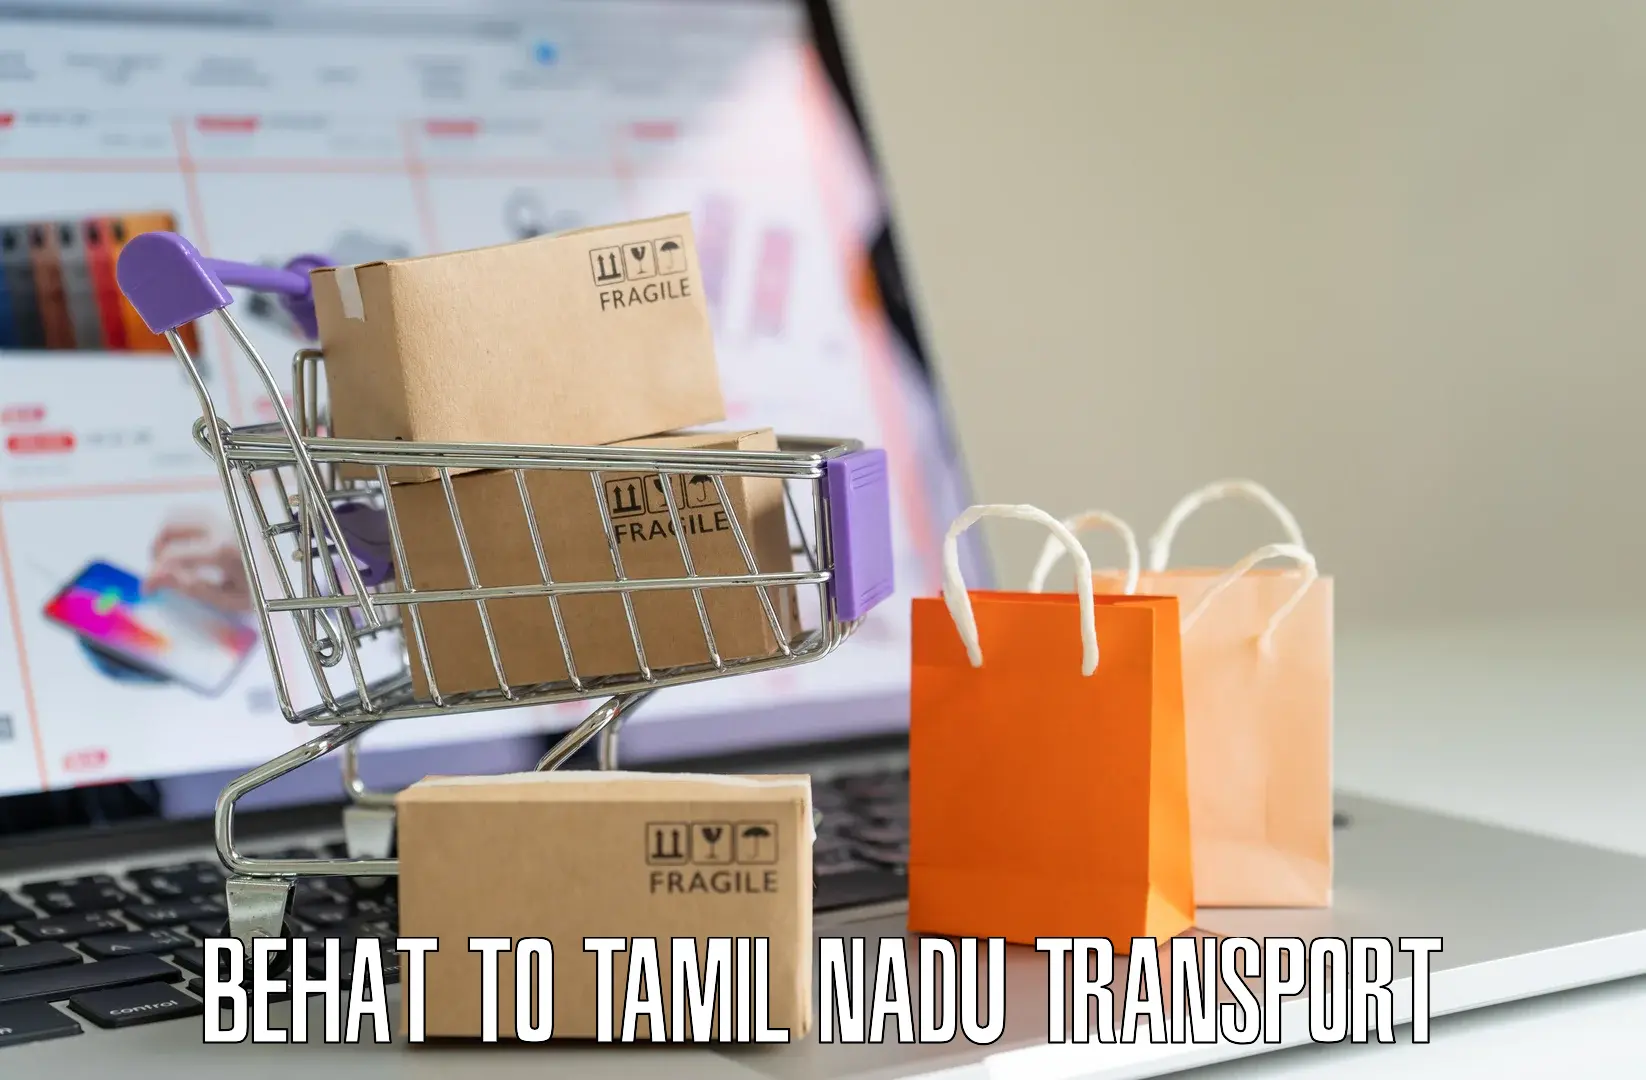 Container transport service Behat to Tamil Nadu